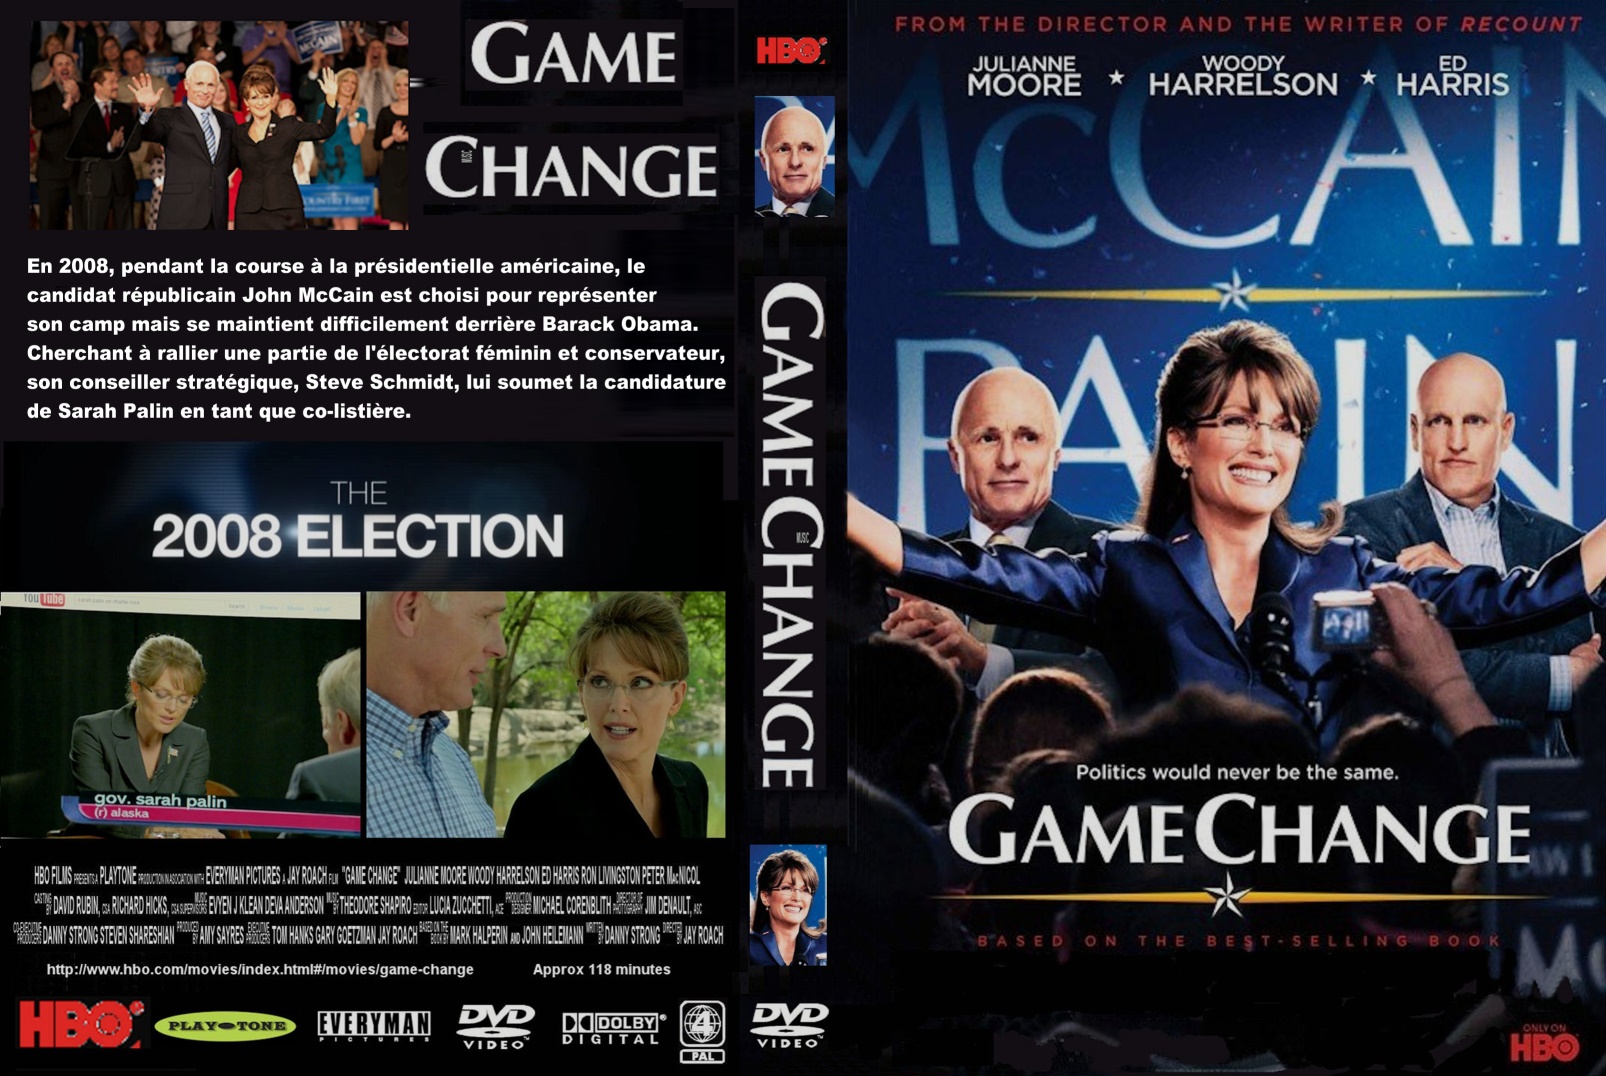 Jaquette DVD Game Chance custom